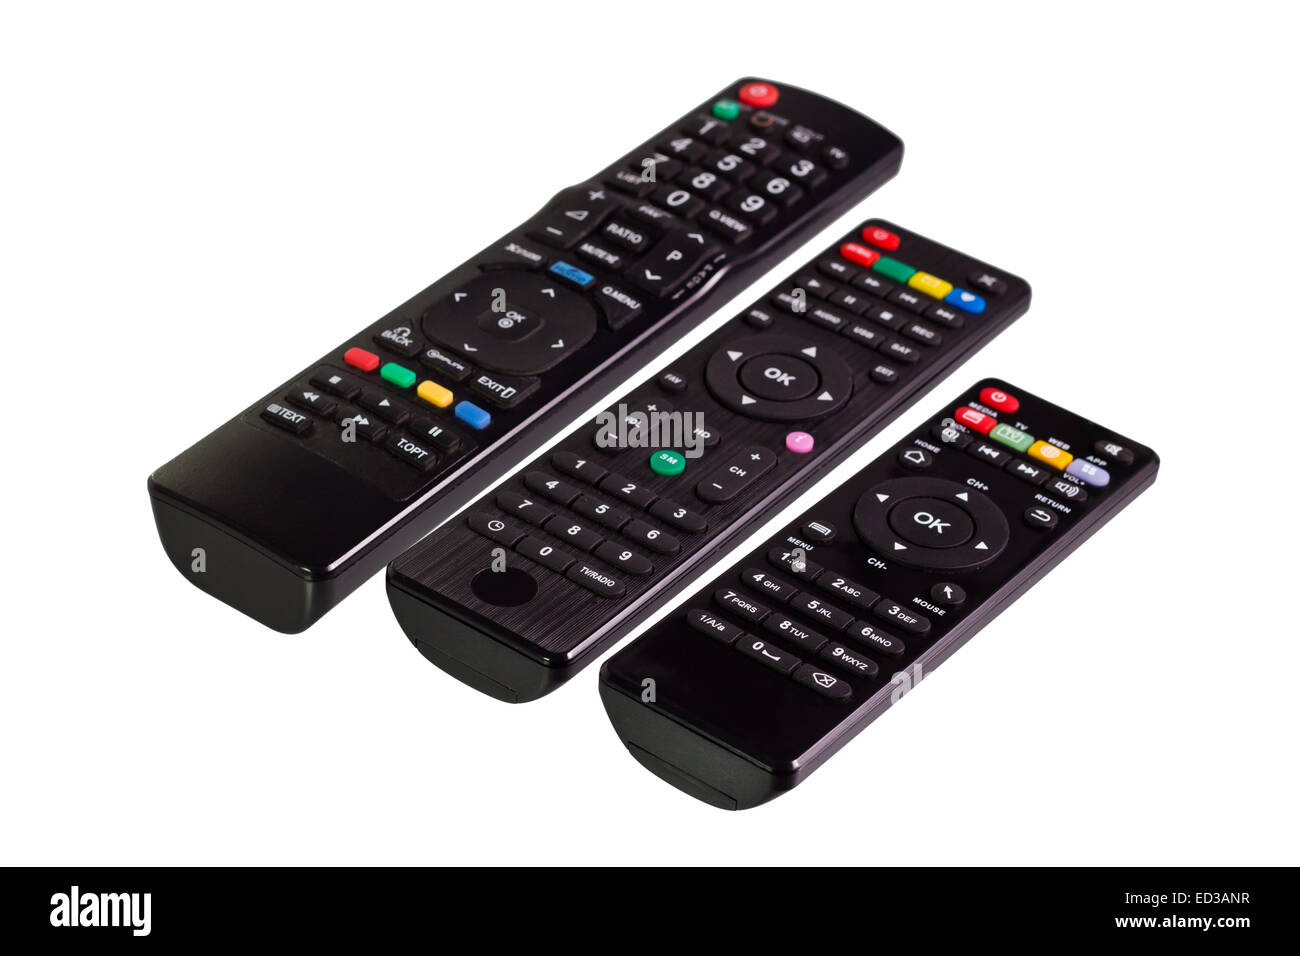 3 different type of remote controls on isolate white background. Stock Photo